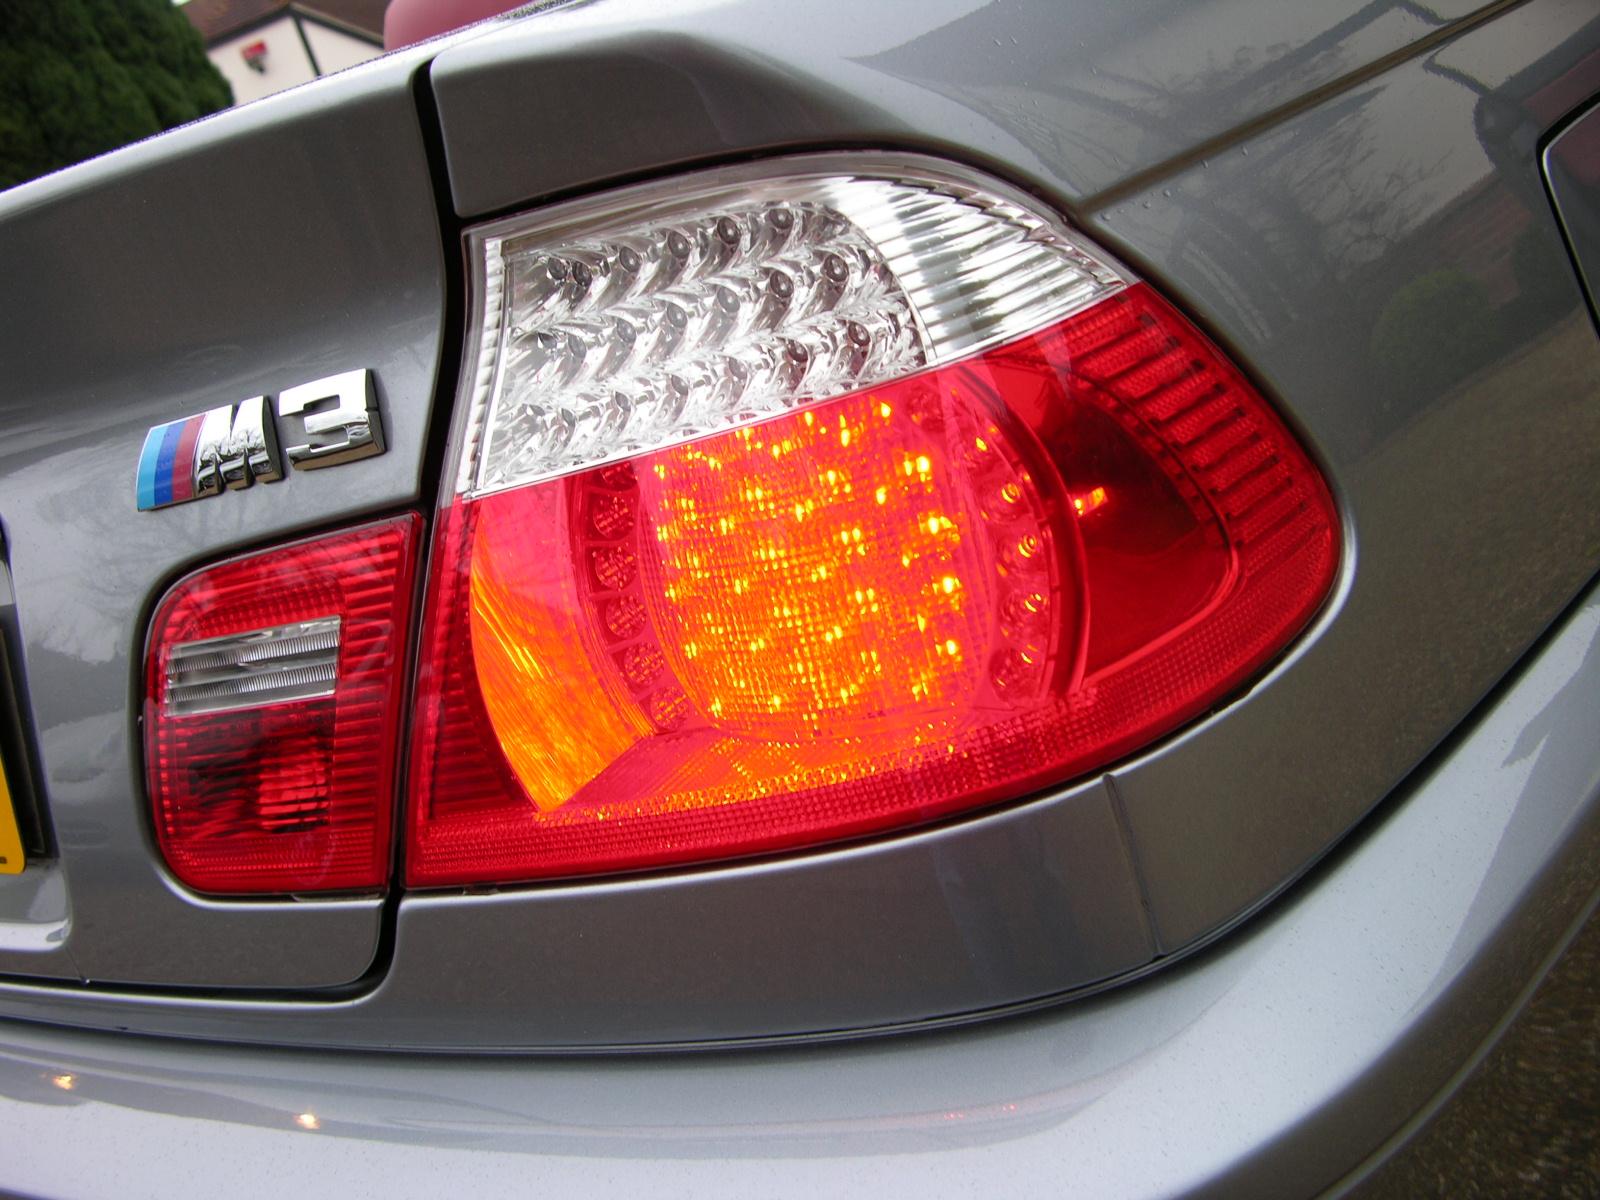 a close up of the tail lights of a grey car